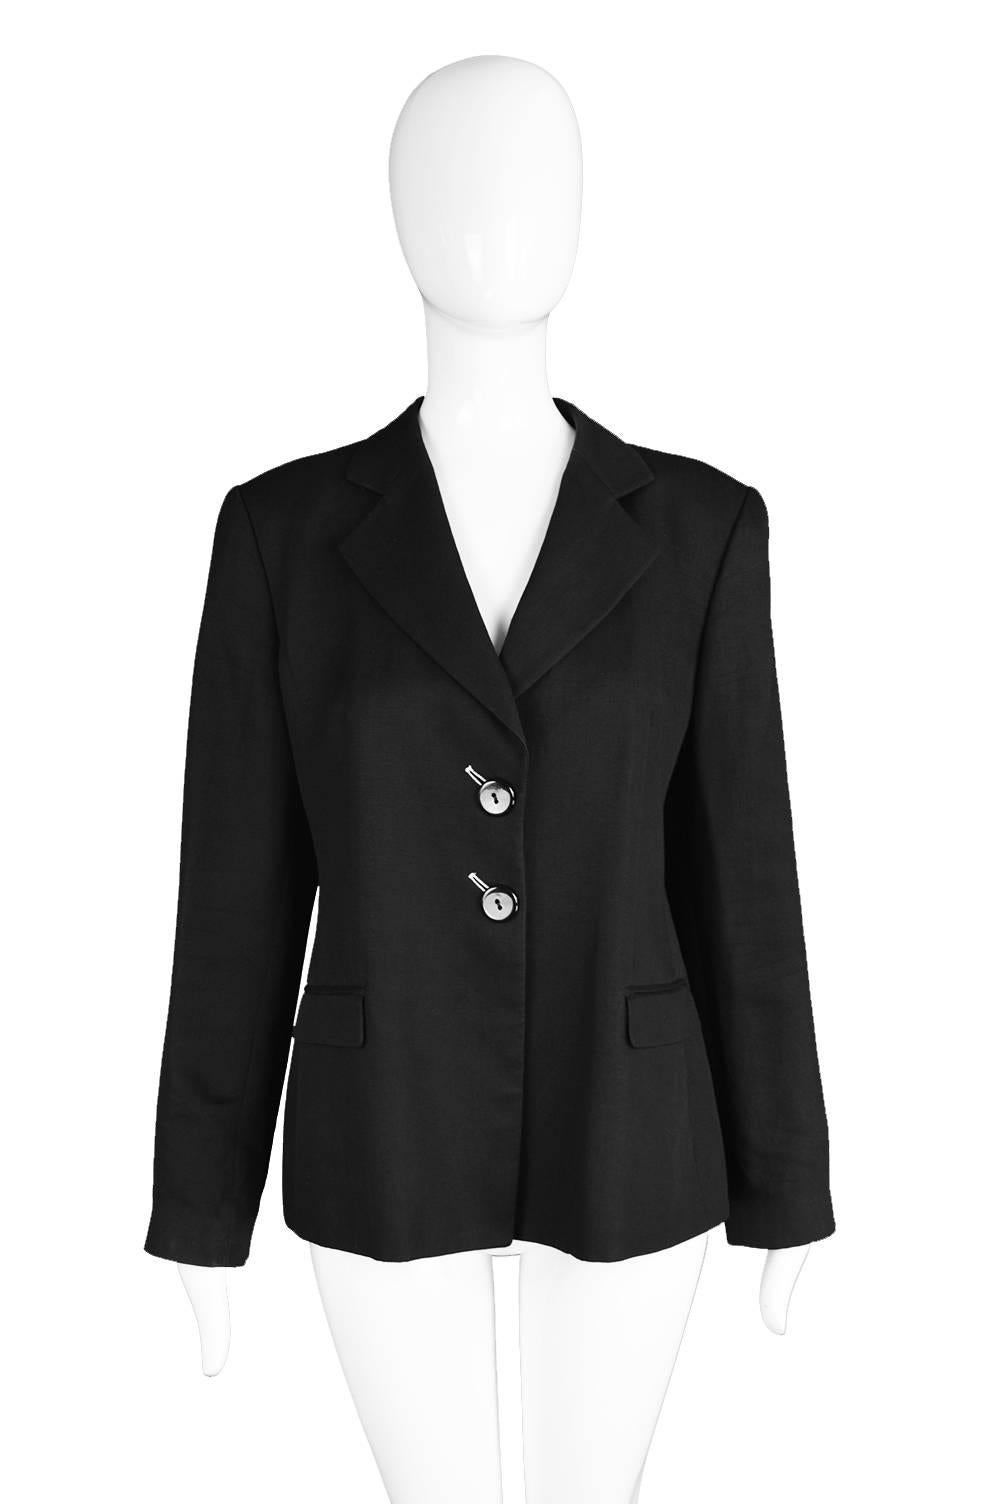 An immaculately tailored vintage Giorgio Armani women's blazer for the Emporio Armani line. Made in Italy, with a simple, minimalist look - the buttonholes are white and slanted diagonally for a unique touch. The fabric is a light, luxurious